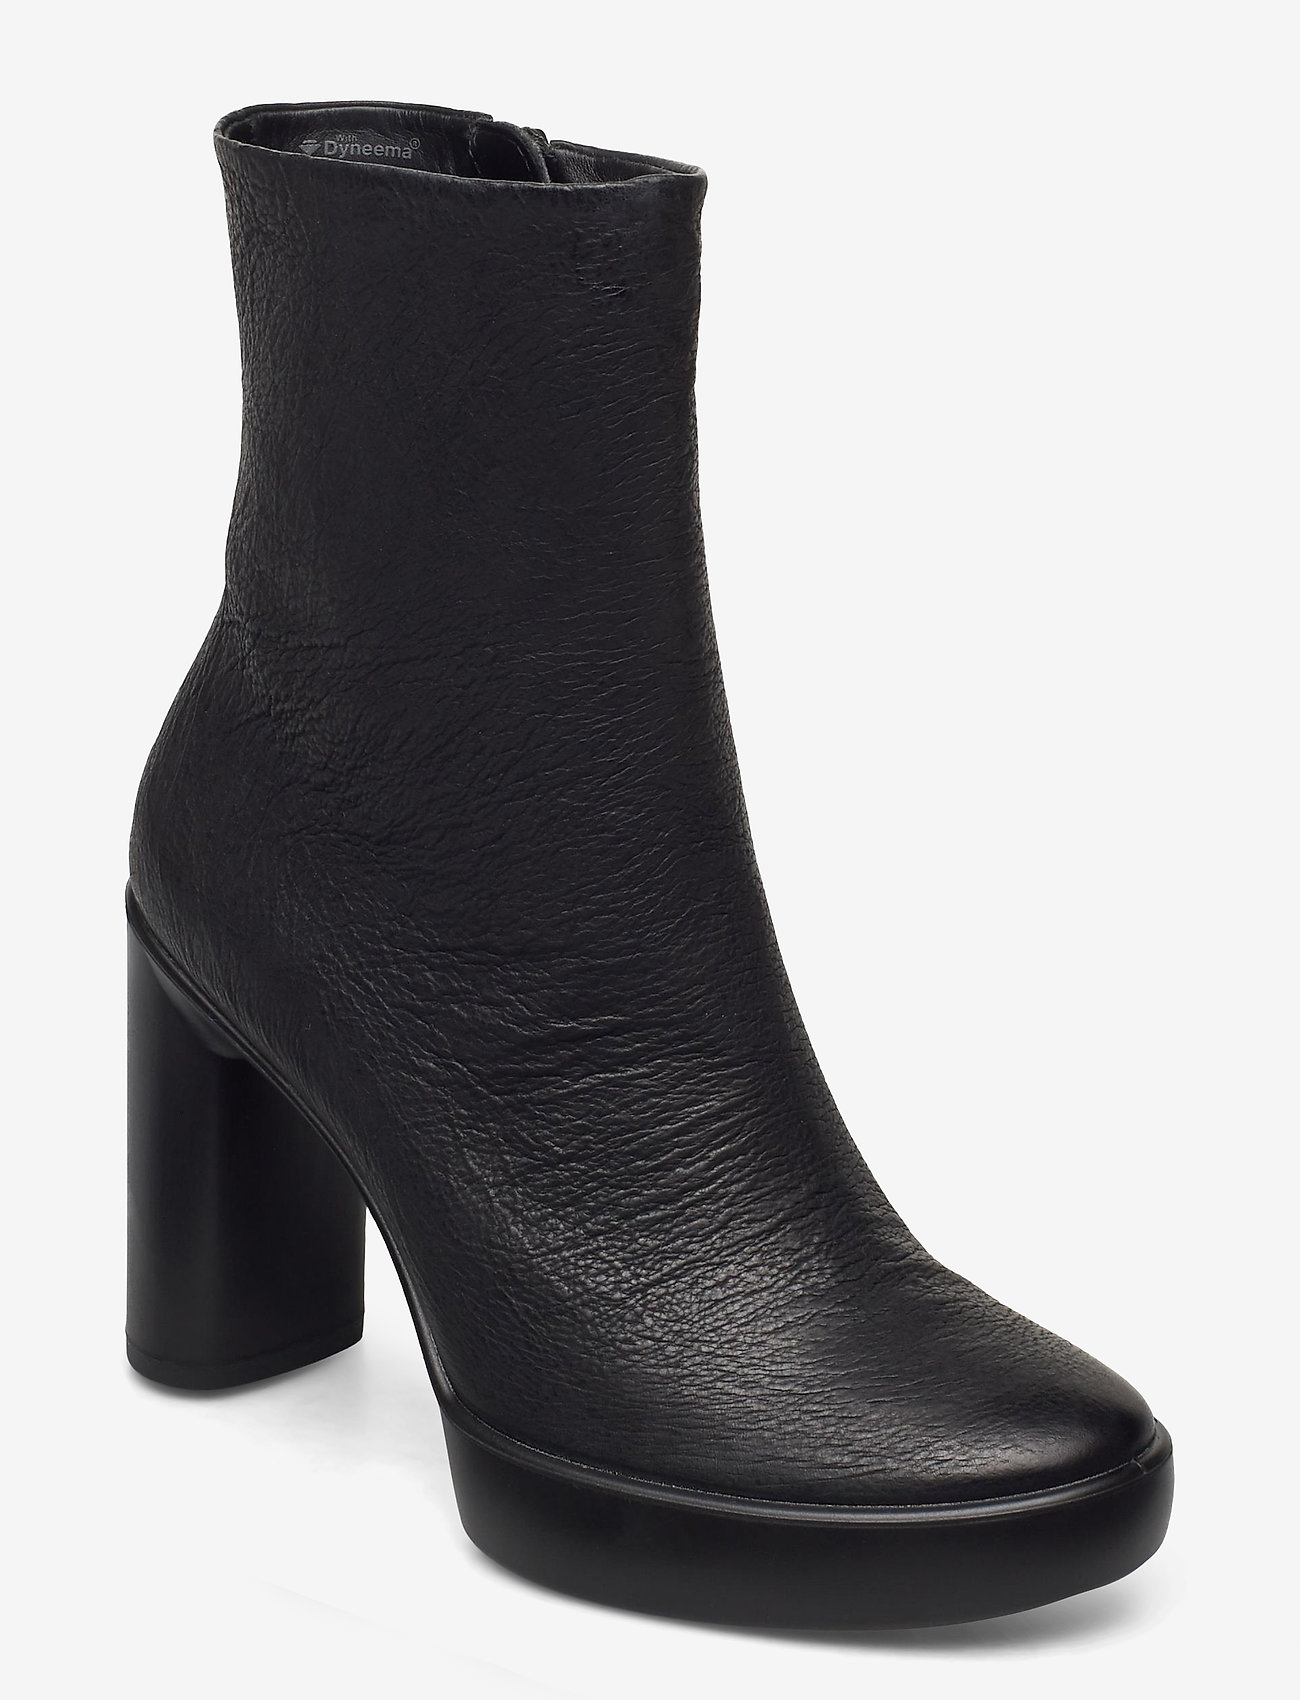 ECCO Women's Soft 7 Low Bootie Black Leather | Laurie's Shoes